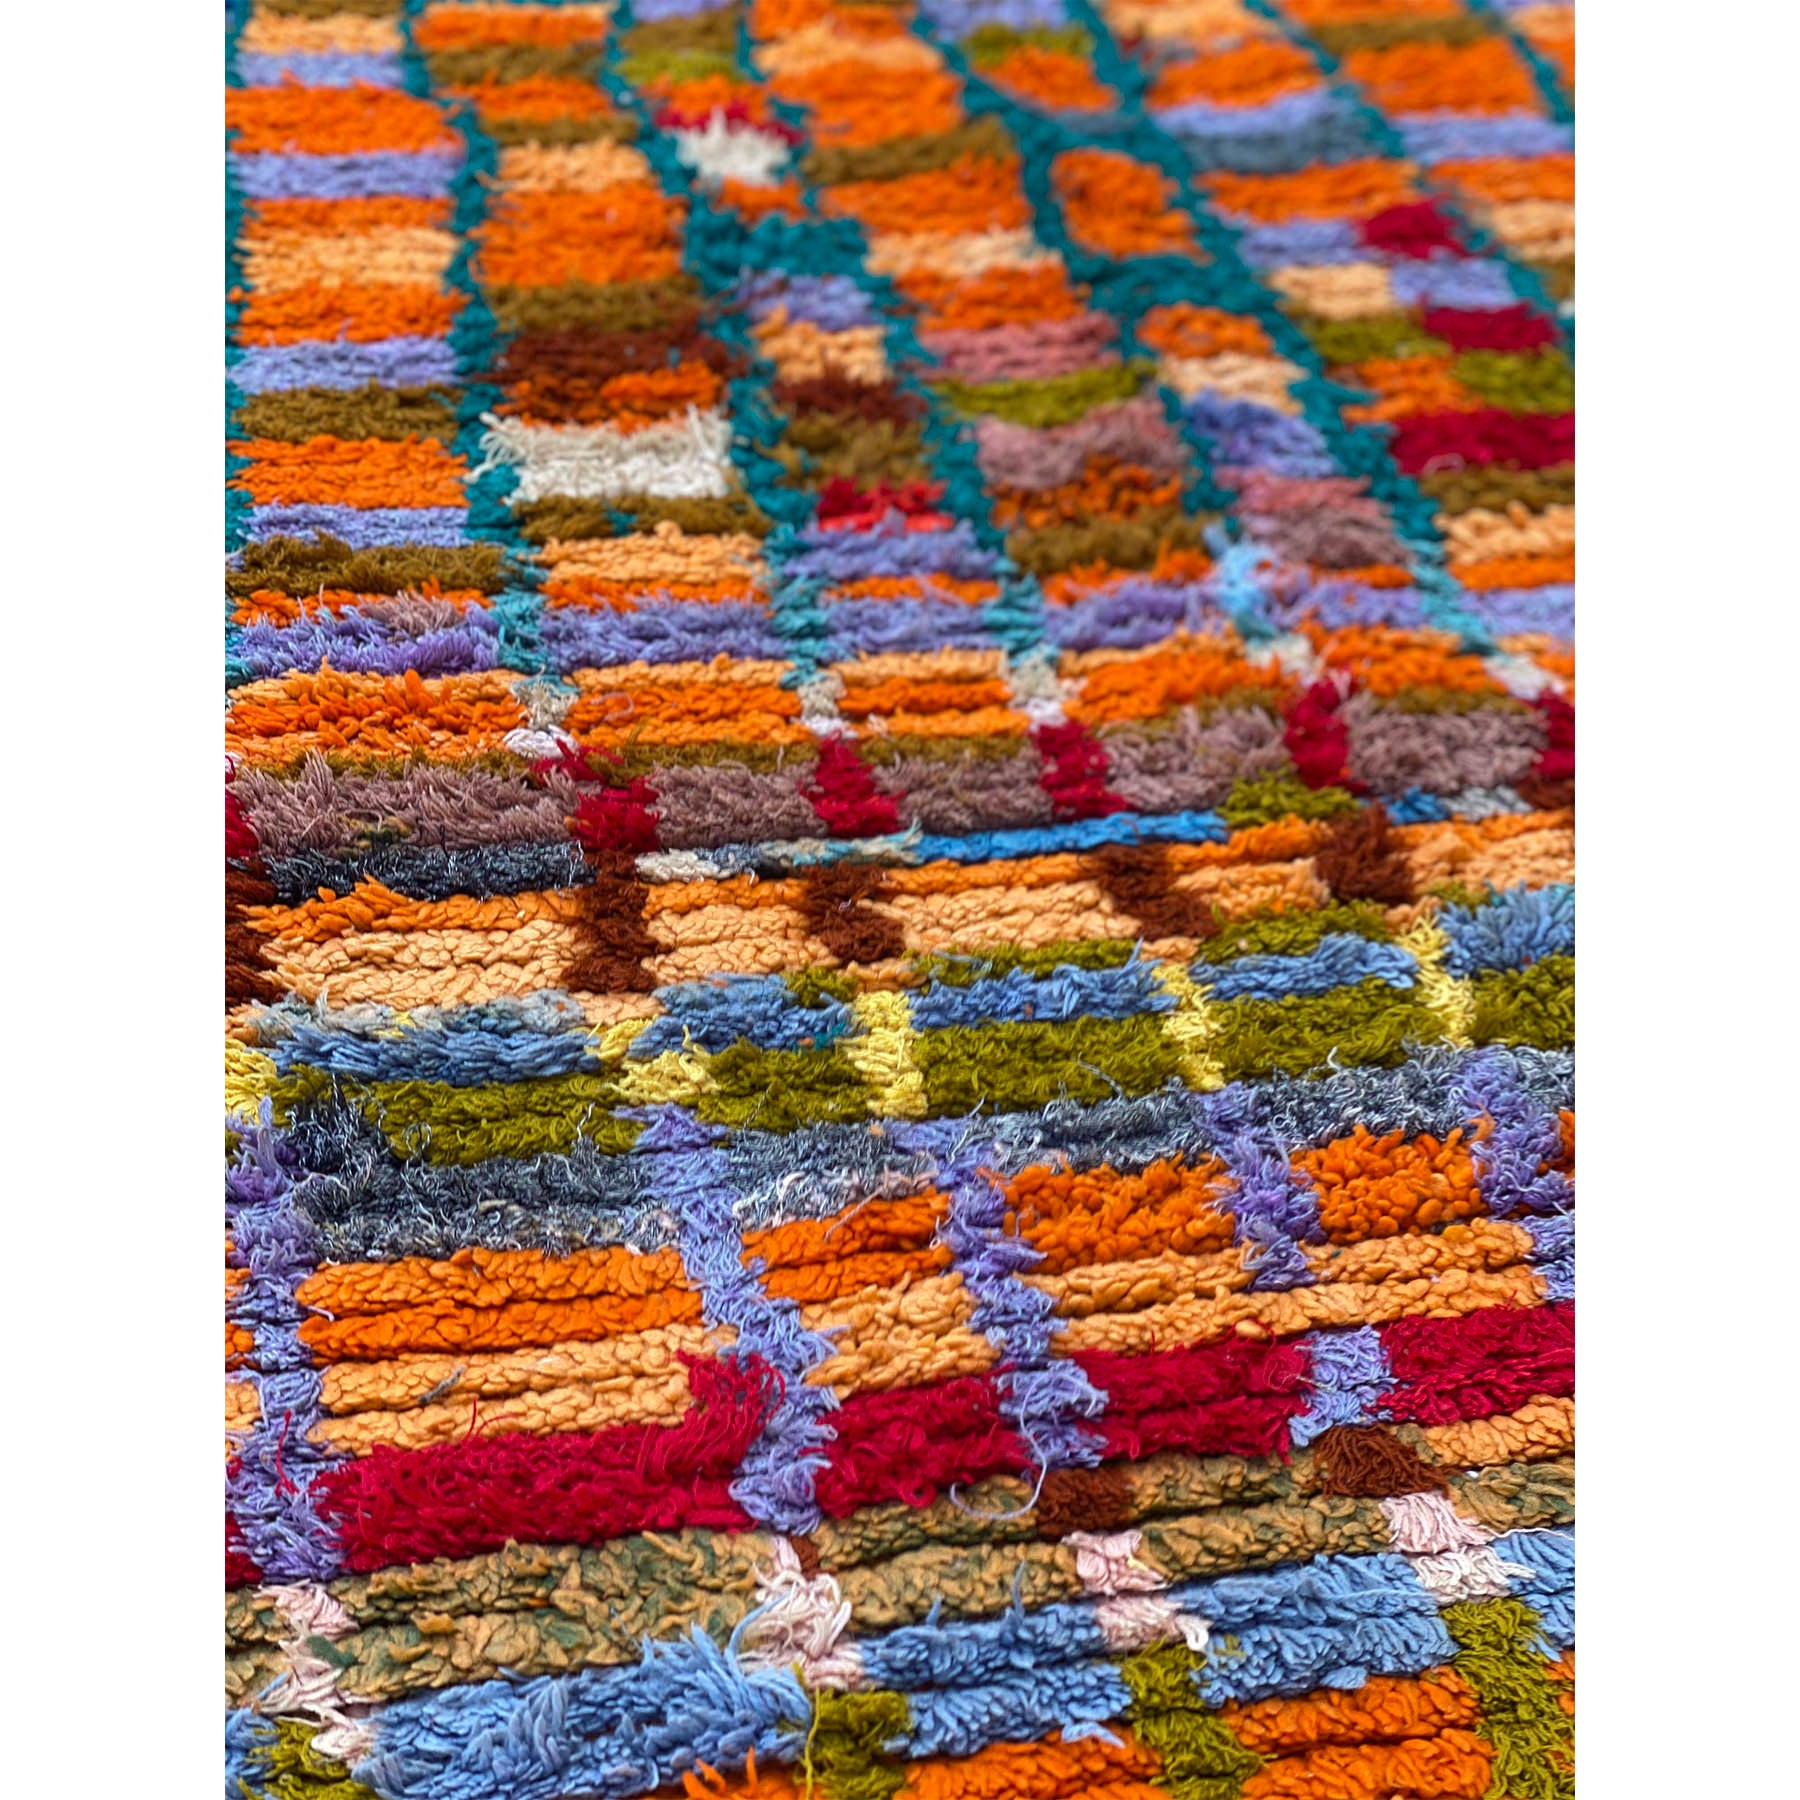 Handknotted colorful Moroccan pile rug with flatwoven section - Kantara | Moroccan Rugs